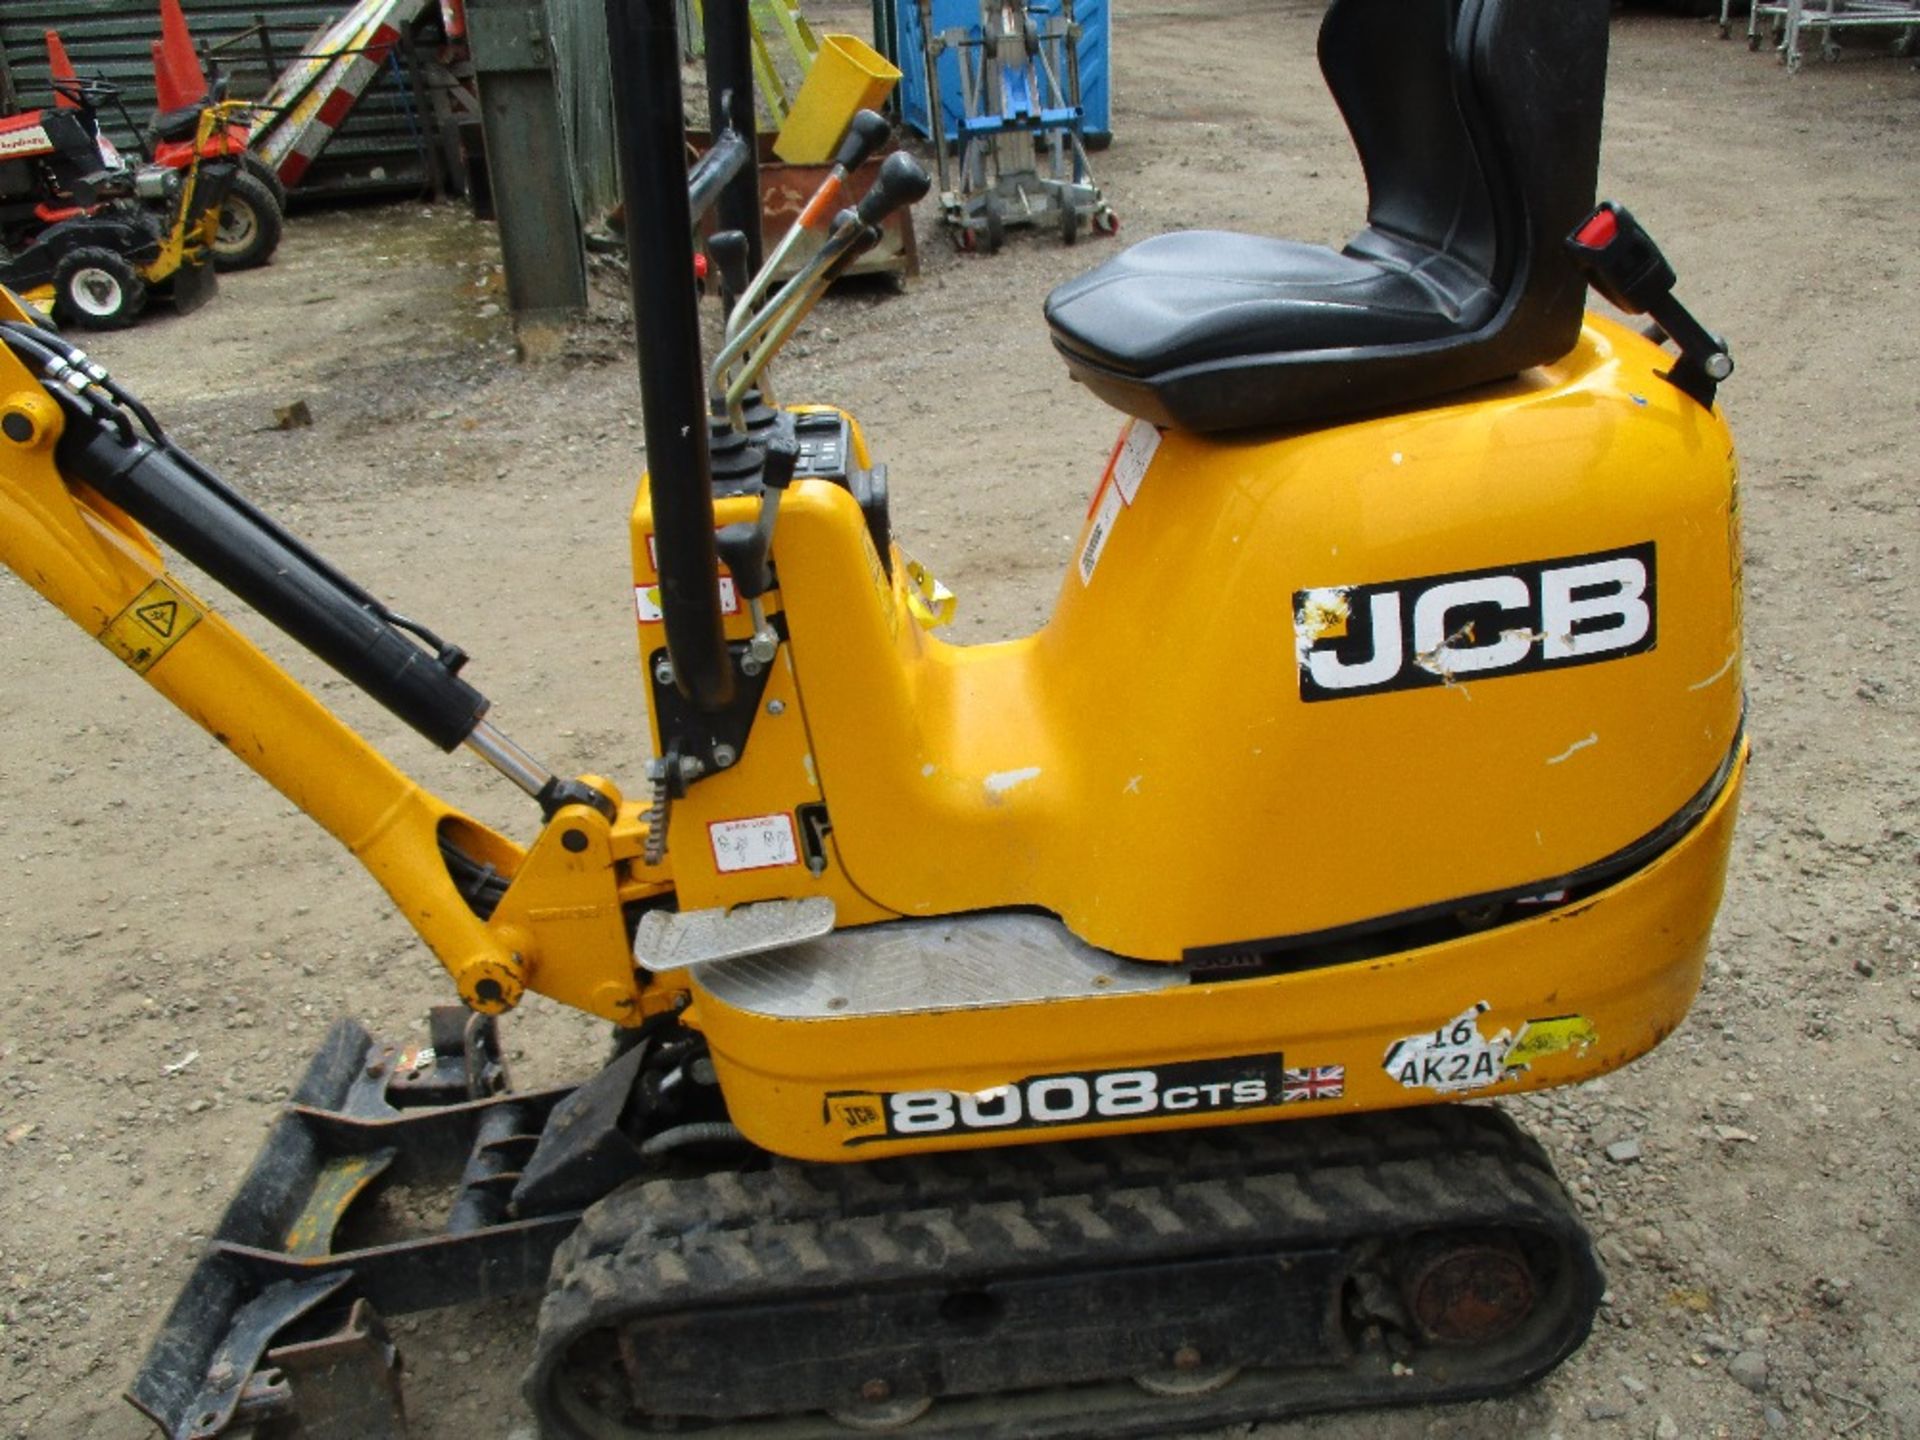 JCB 8008 CTS MICRO EXCAVATOR EXPANDING TRACKS 664REC HRS - Image 6 of 6